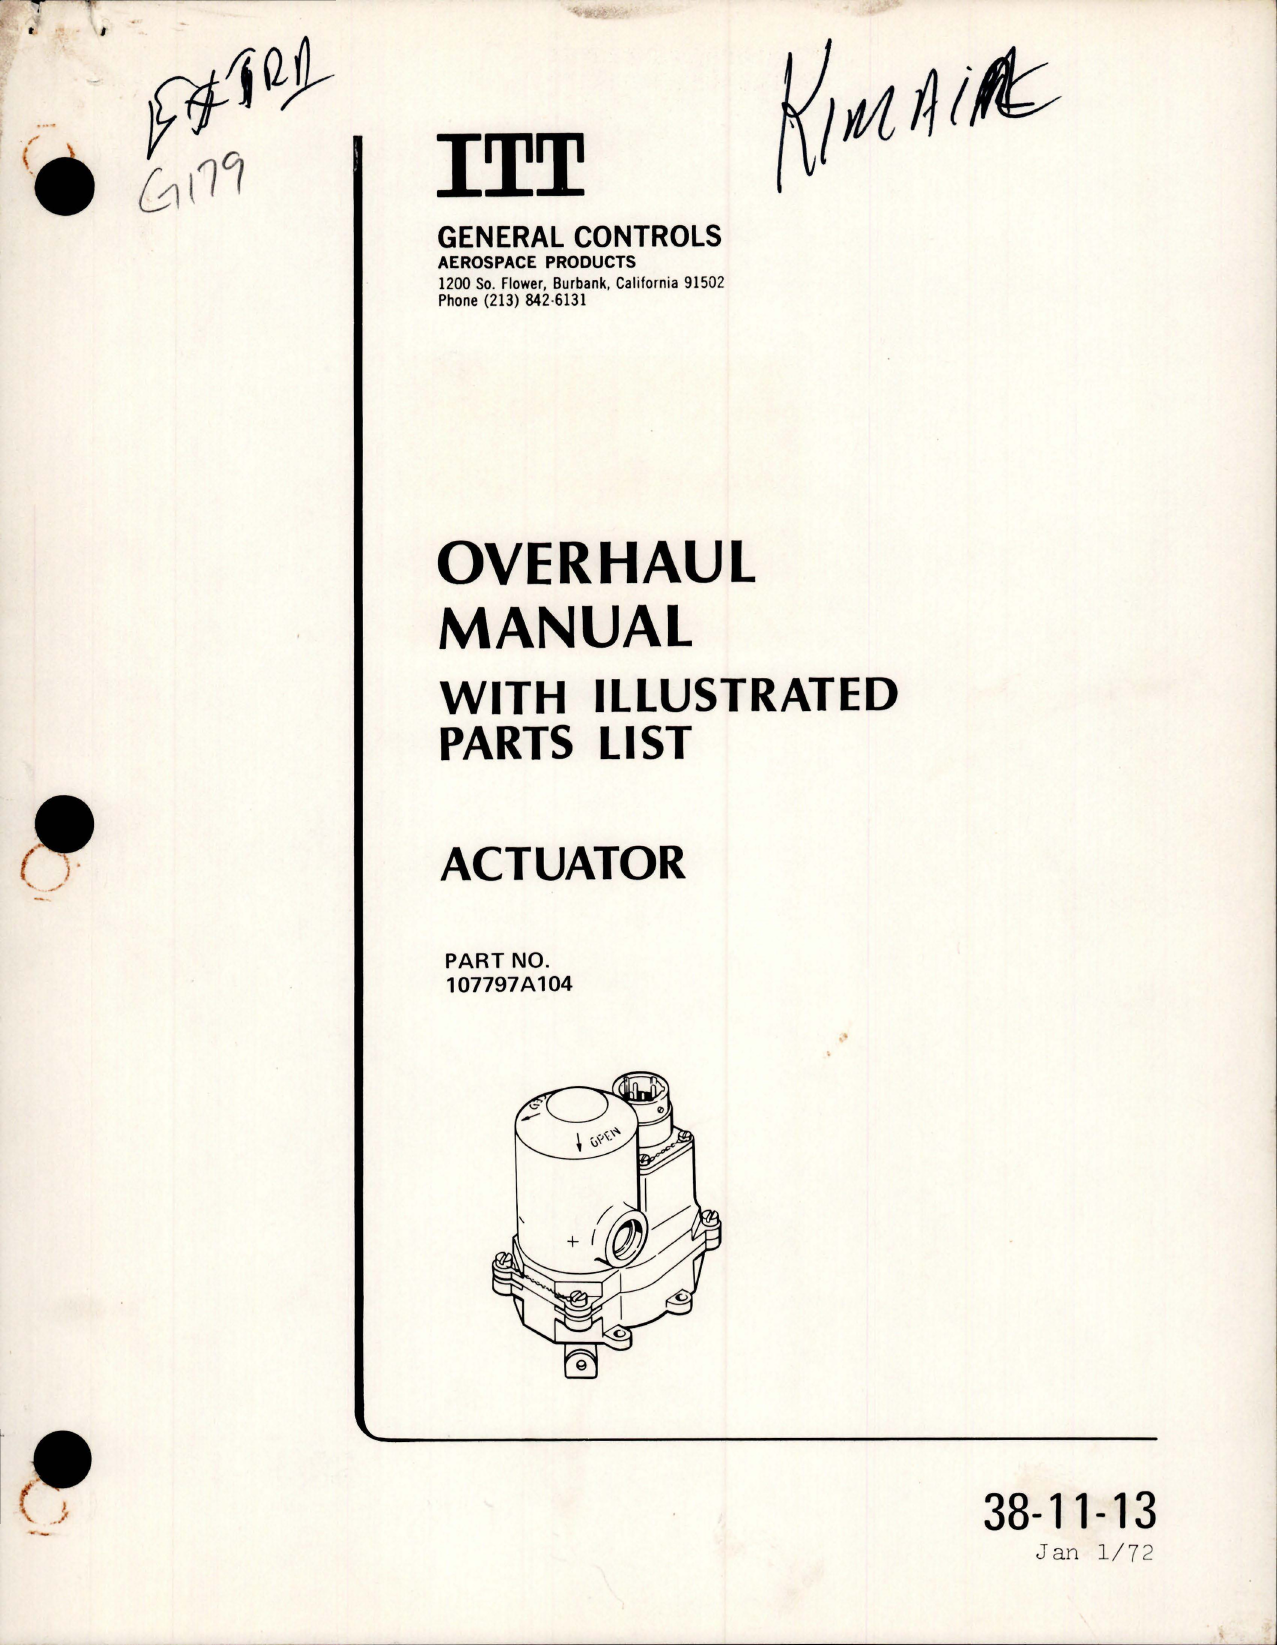 Sample page 1 from AirCorps Library document: Overhaul w Illustrated Parts List for Actuator - Part 107797A104 